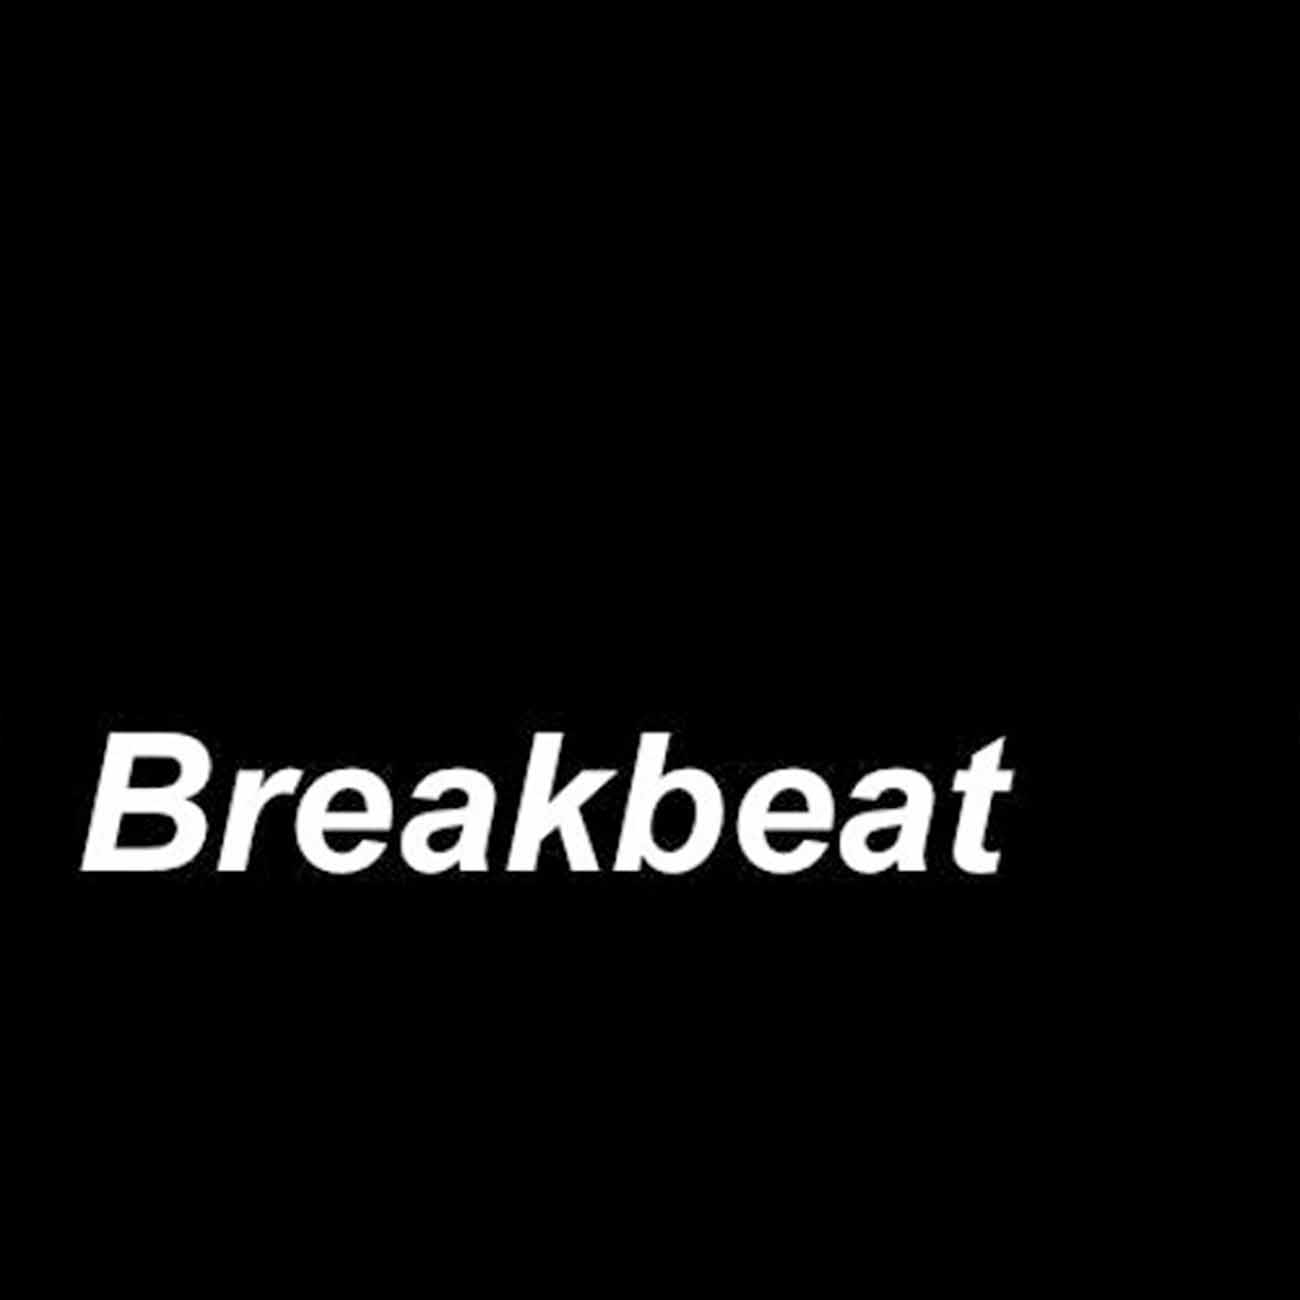 What is a breakbeat example?